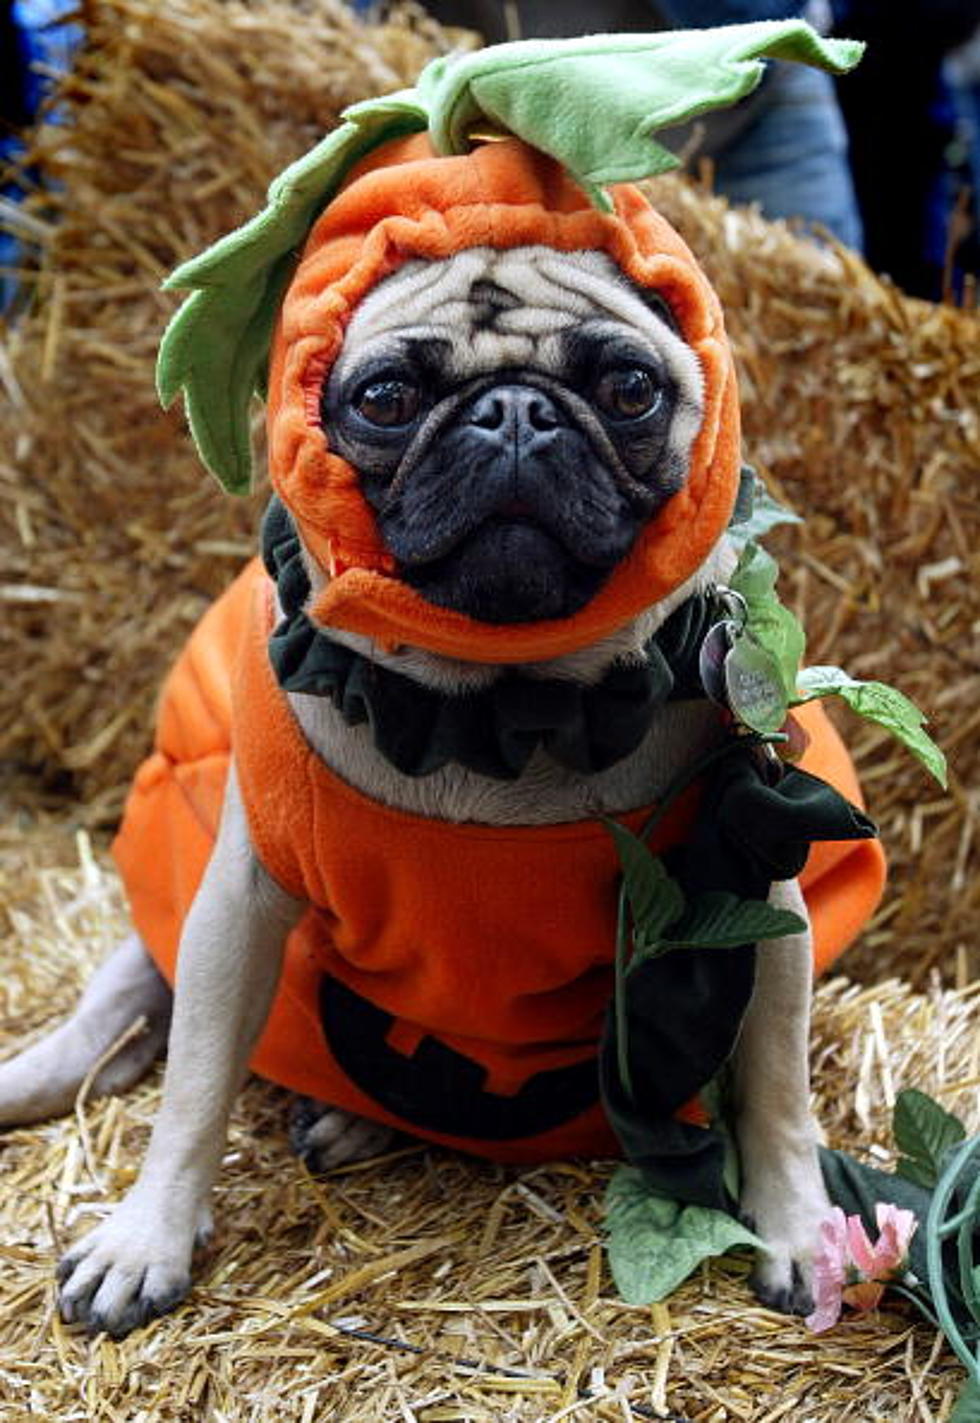 What Costume Are You Dressing Your Pet In This Halloween?